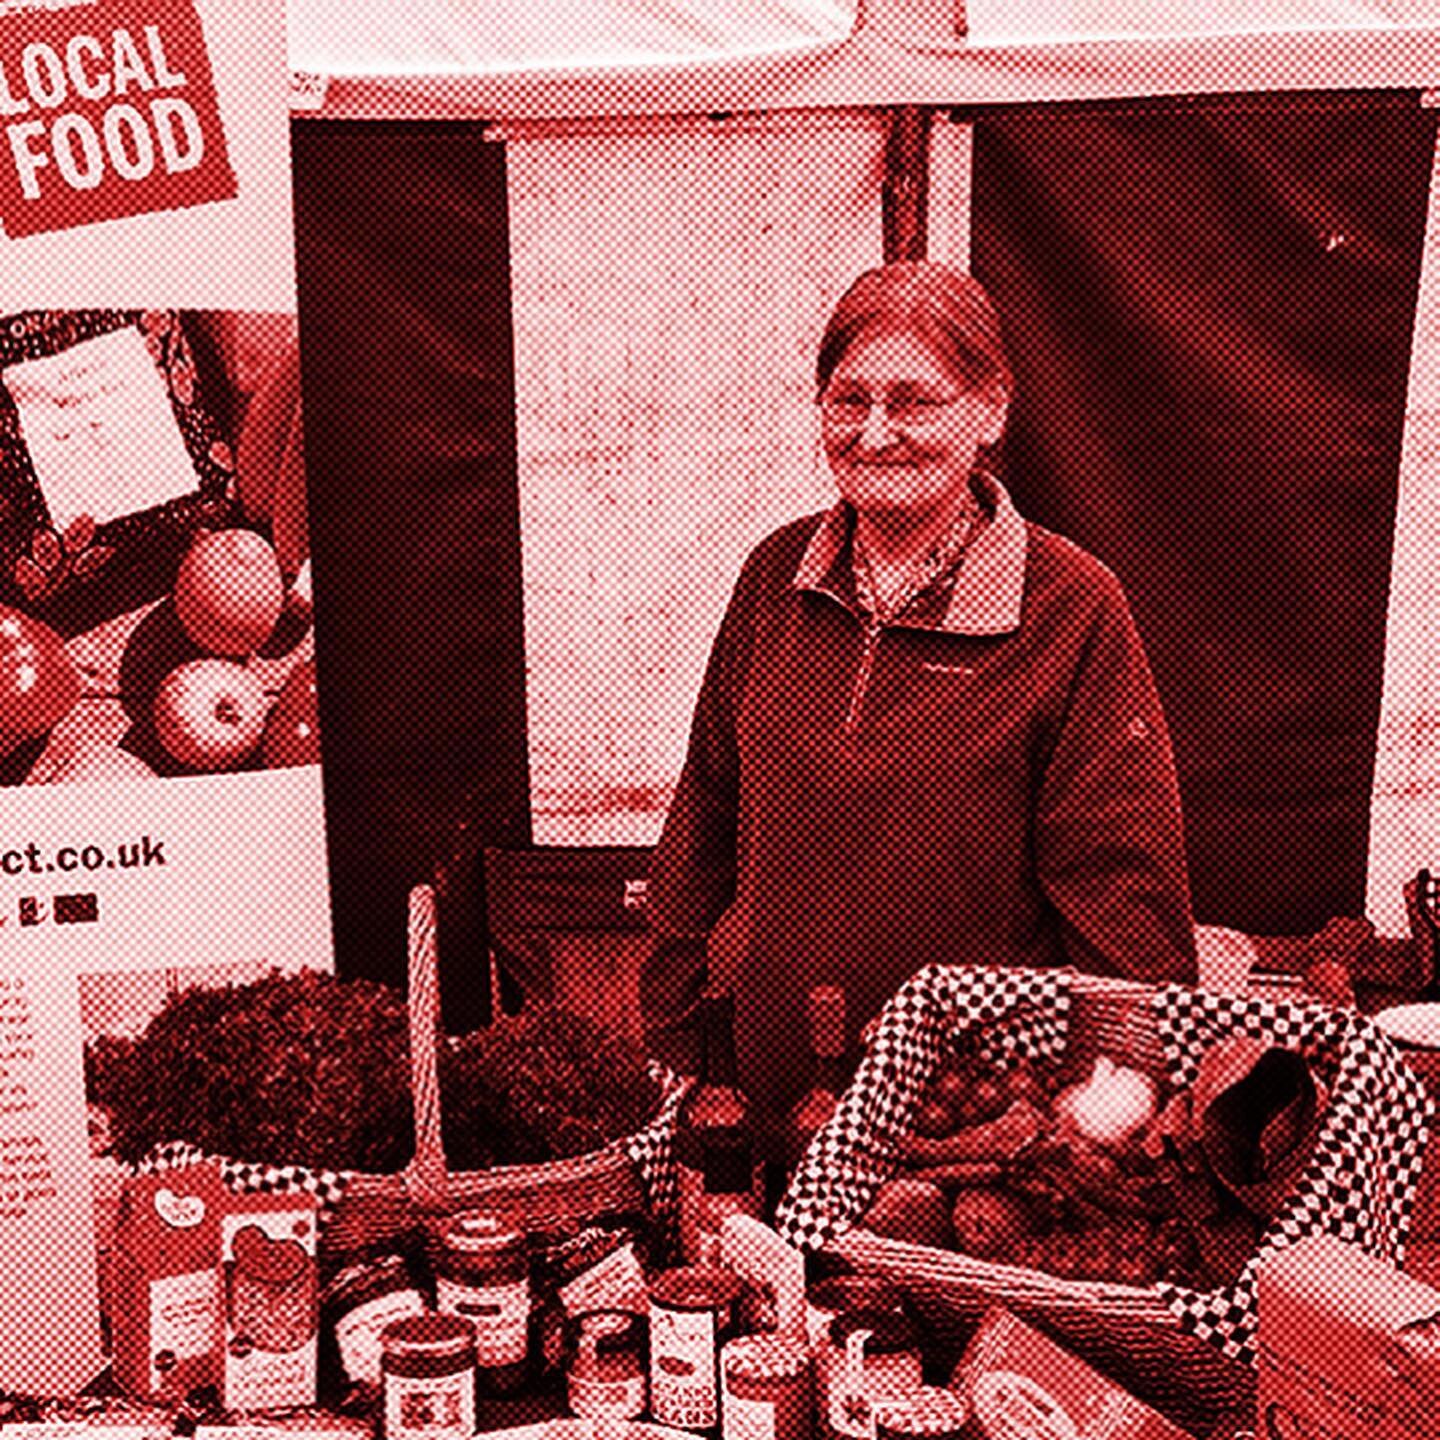 Now more than ever, local food businesses need local eaters.

The recent closure of @somersetlocalfood is a case in point. Things are tough (and will soon get tougher), but every pound spent at a local food business rather than a supermarket makes th